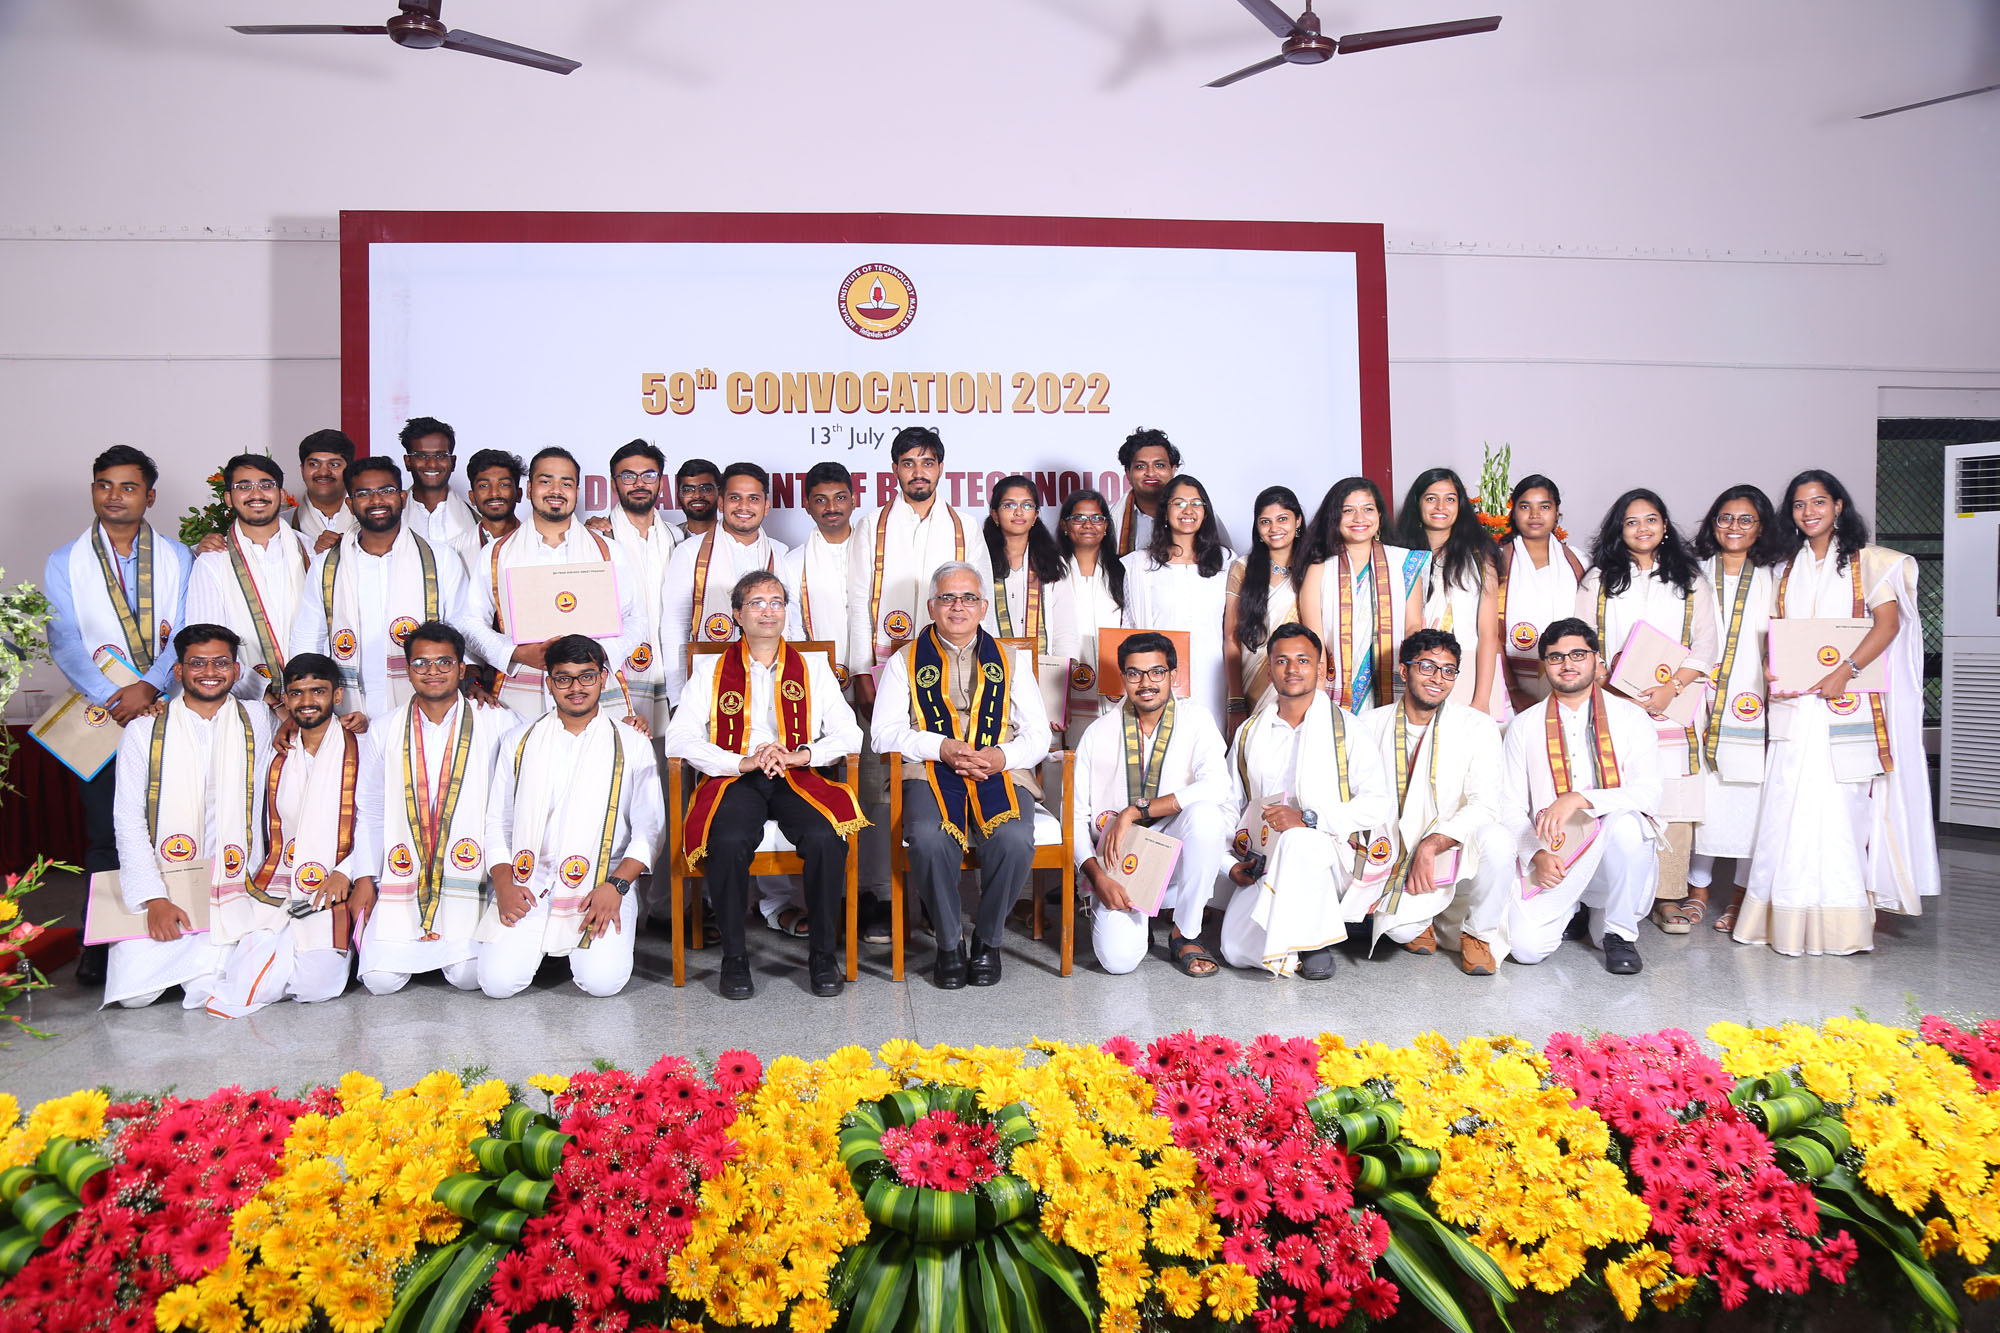 D3P 59thConvocation 2022 | Please click here to view the videos